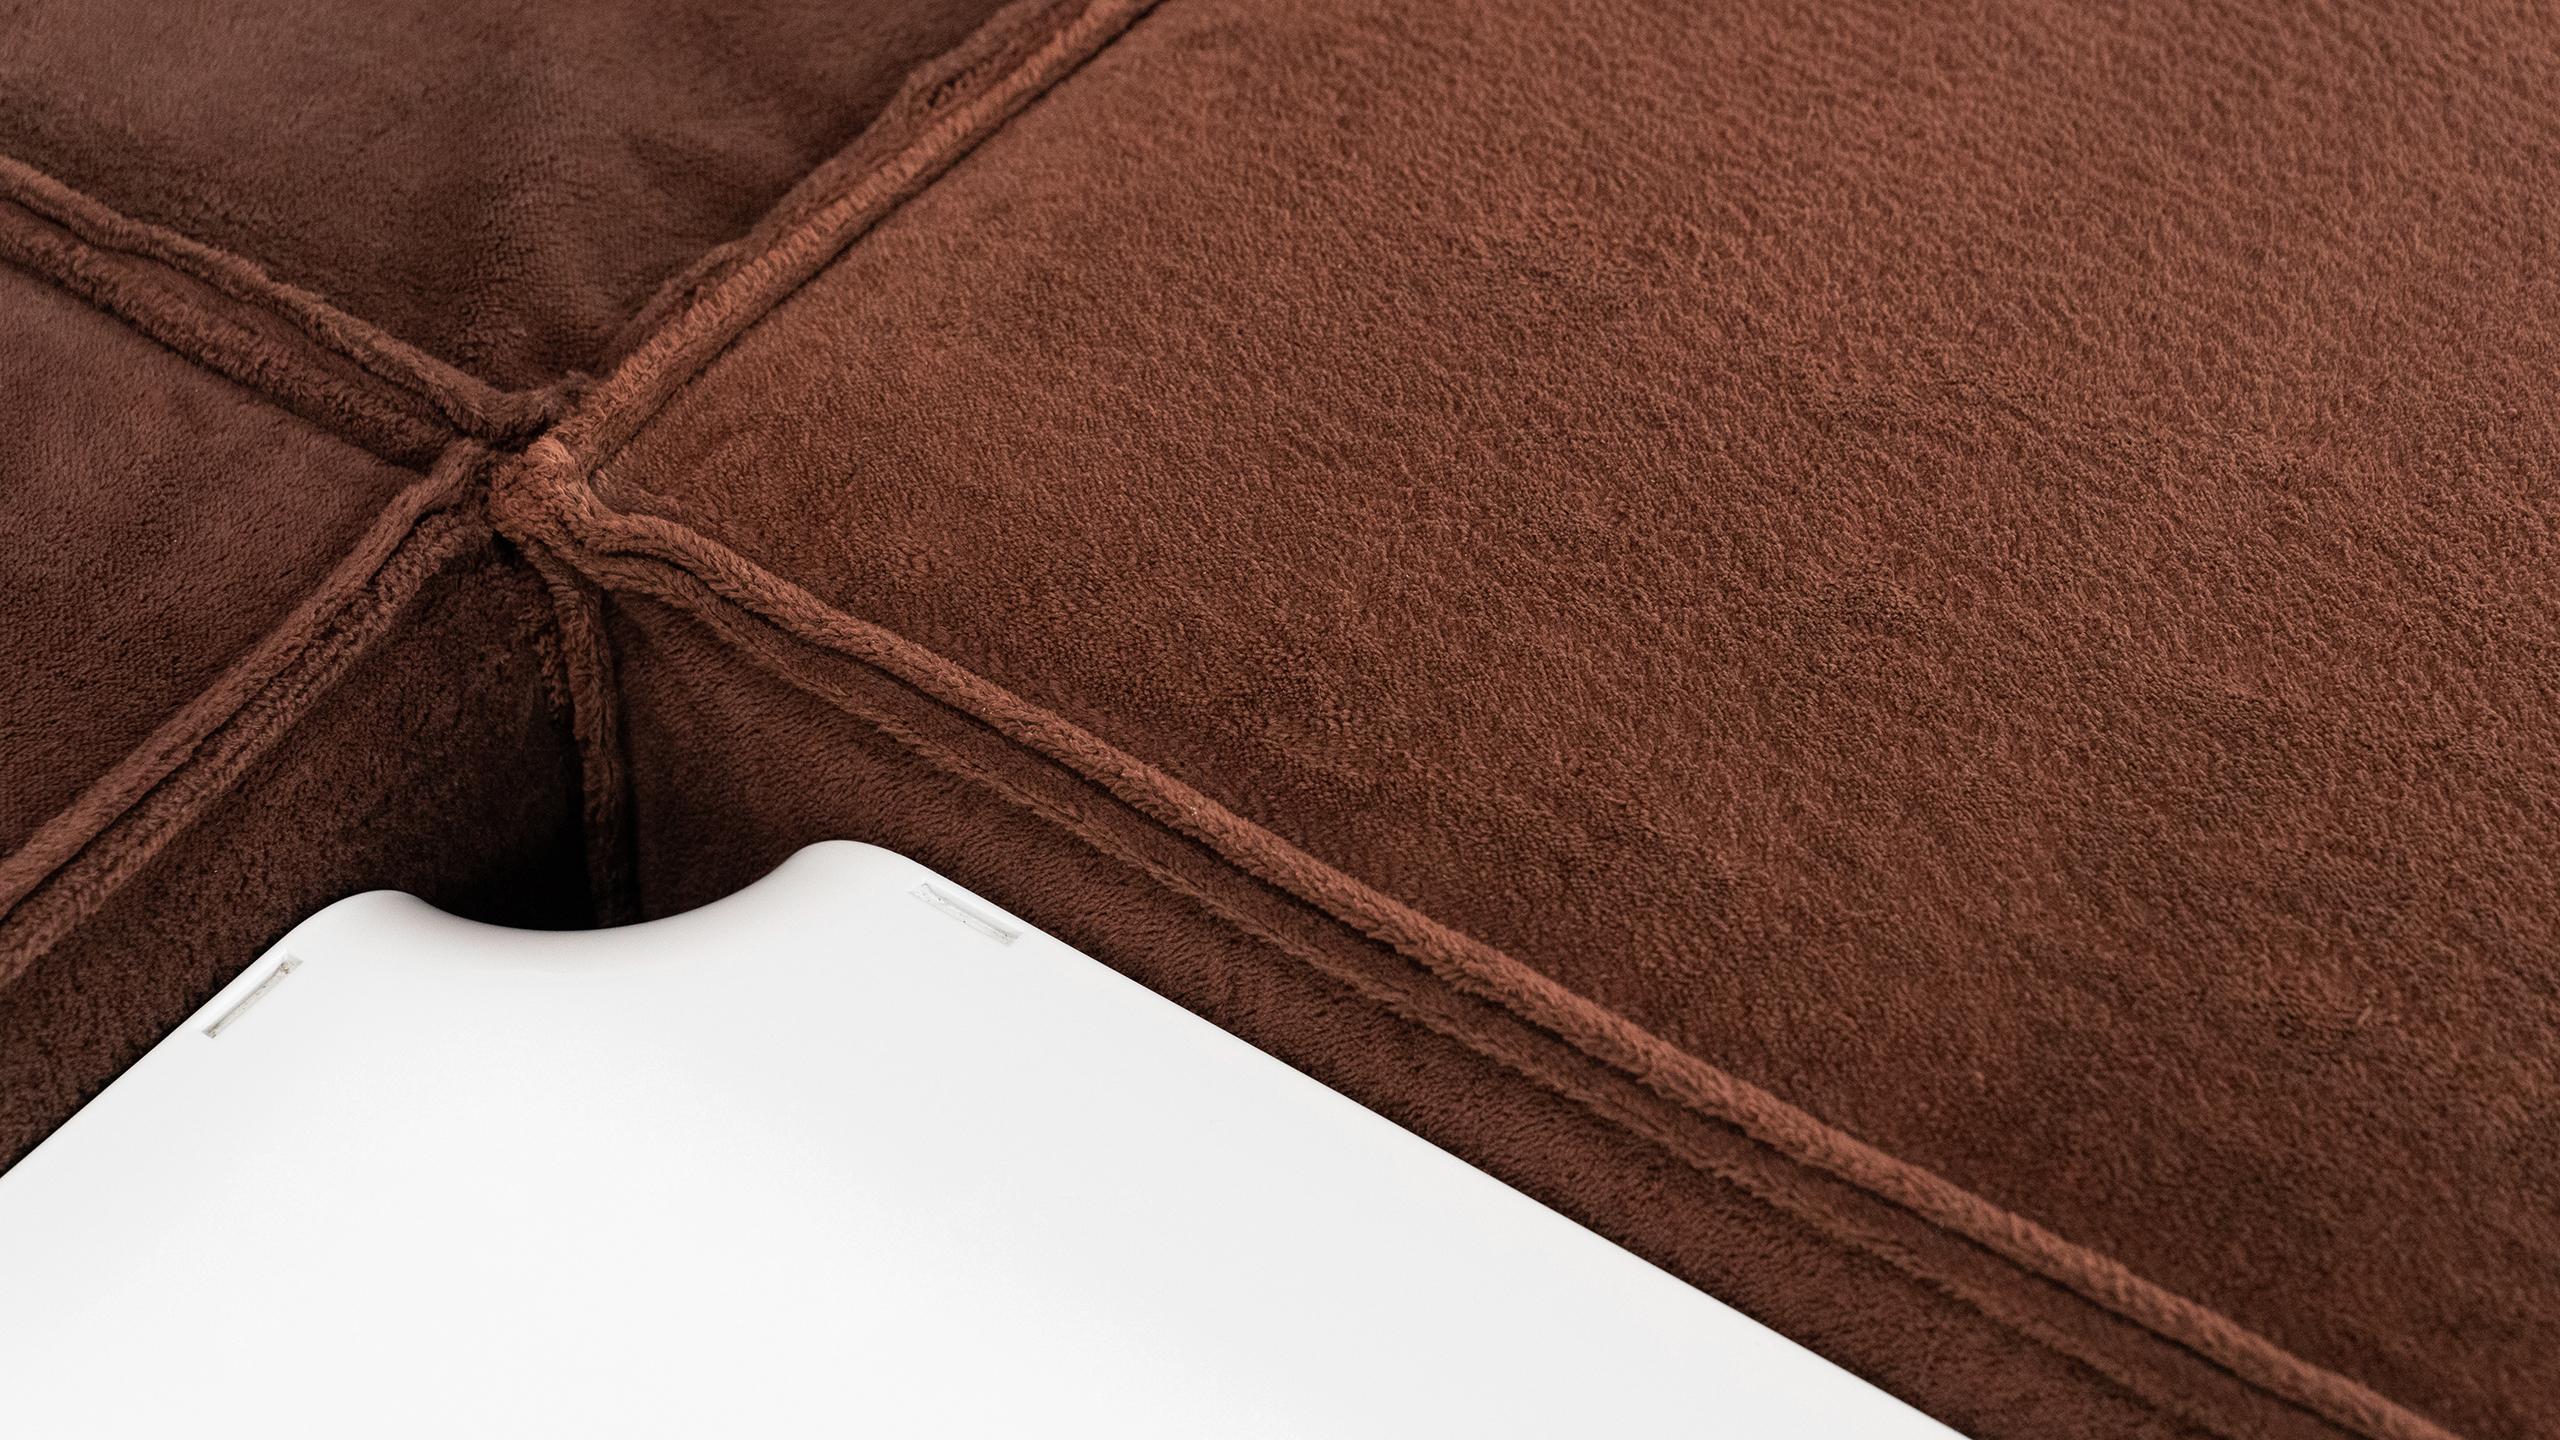 COR Trio Modular Sofa, Giant Landscape in Chocolate Brown, 1972 by Team Form AG 10